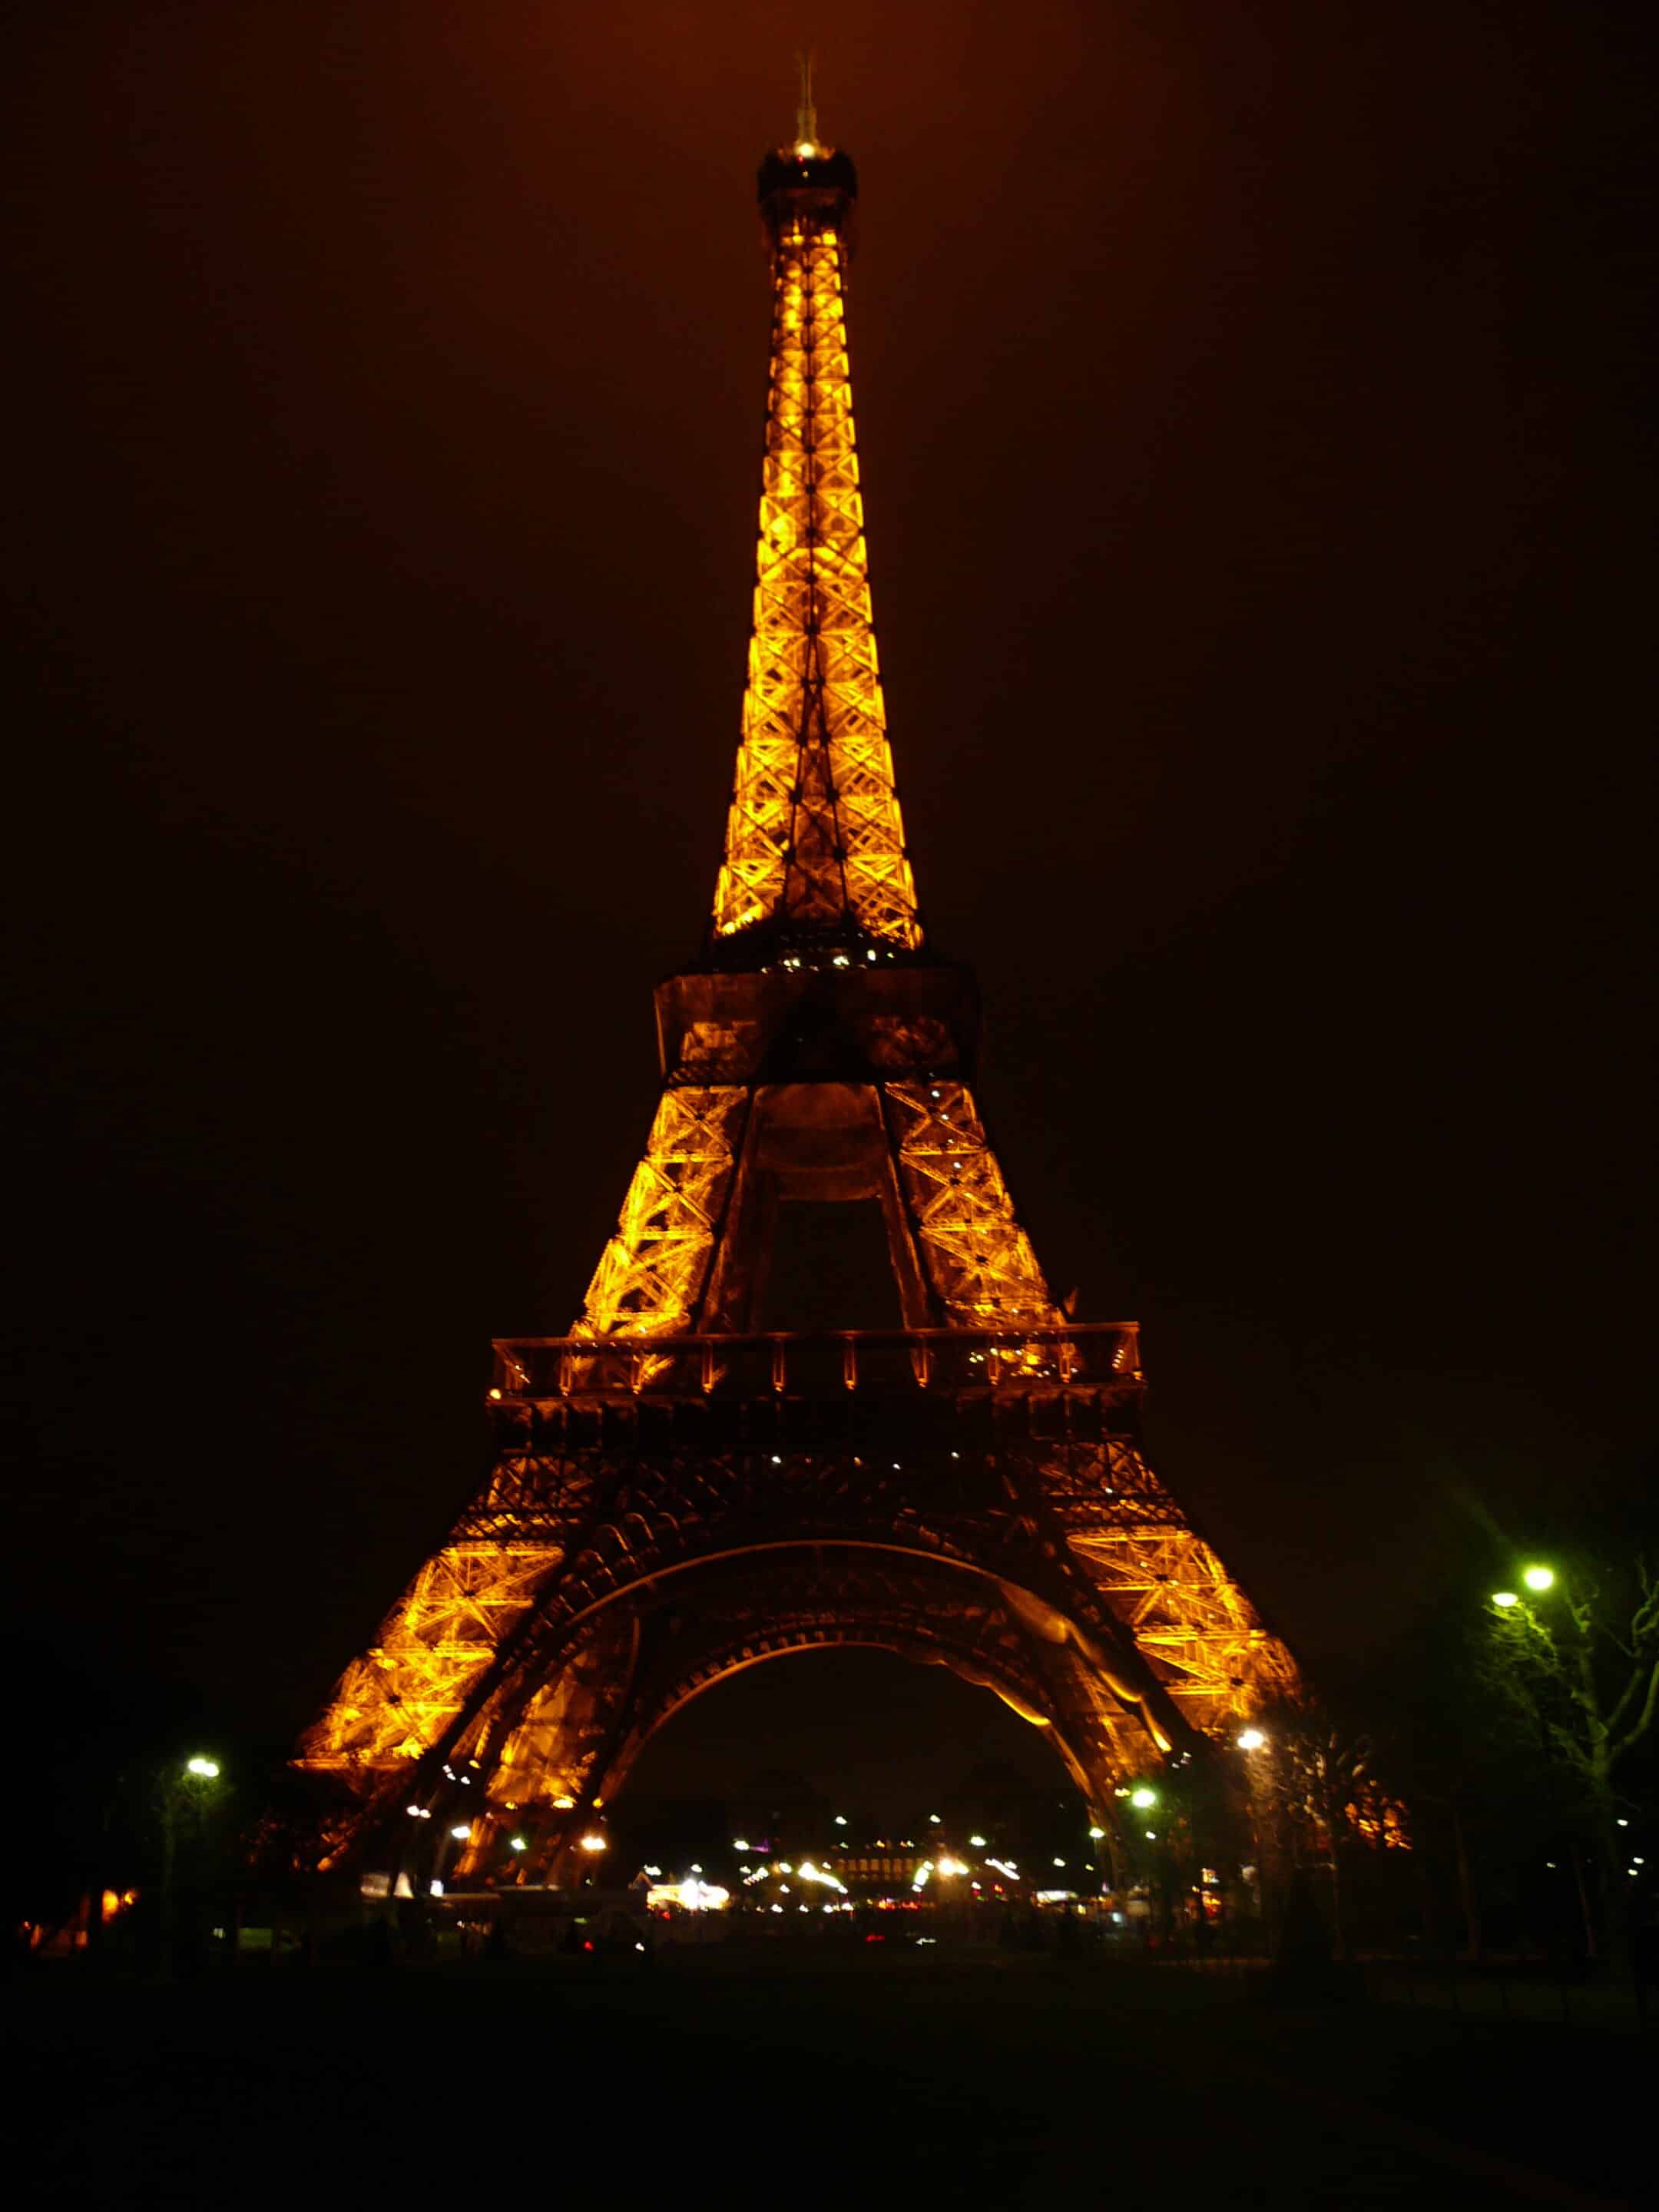 Low-quality photo of the Eiffel Tower at night in Paris, France